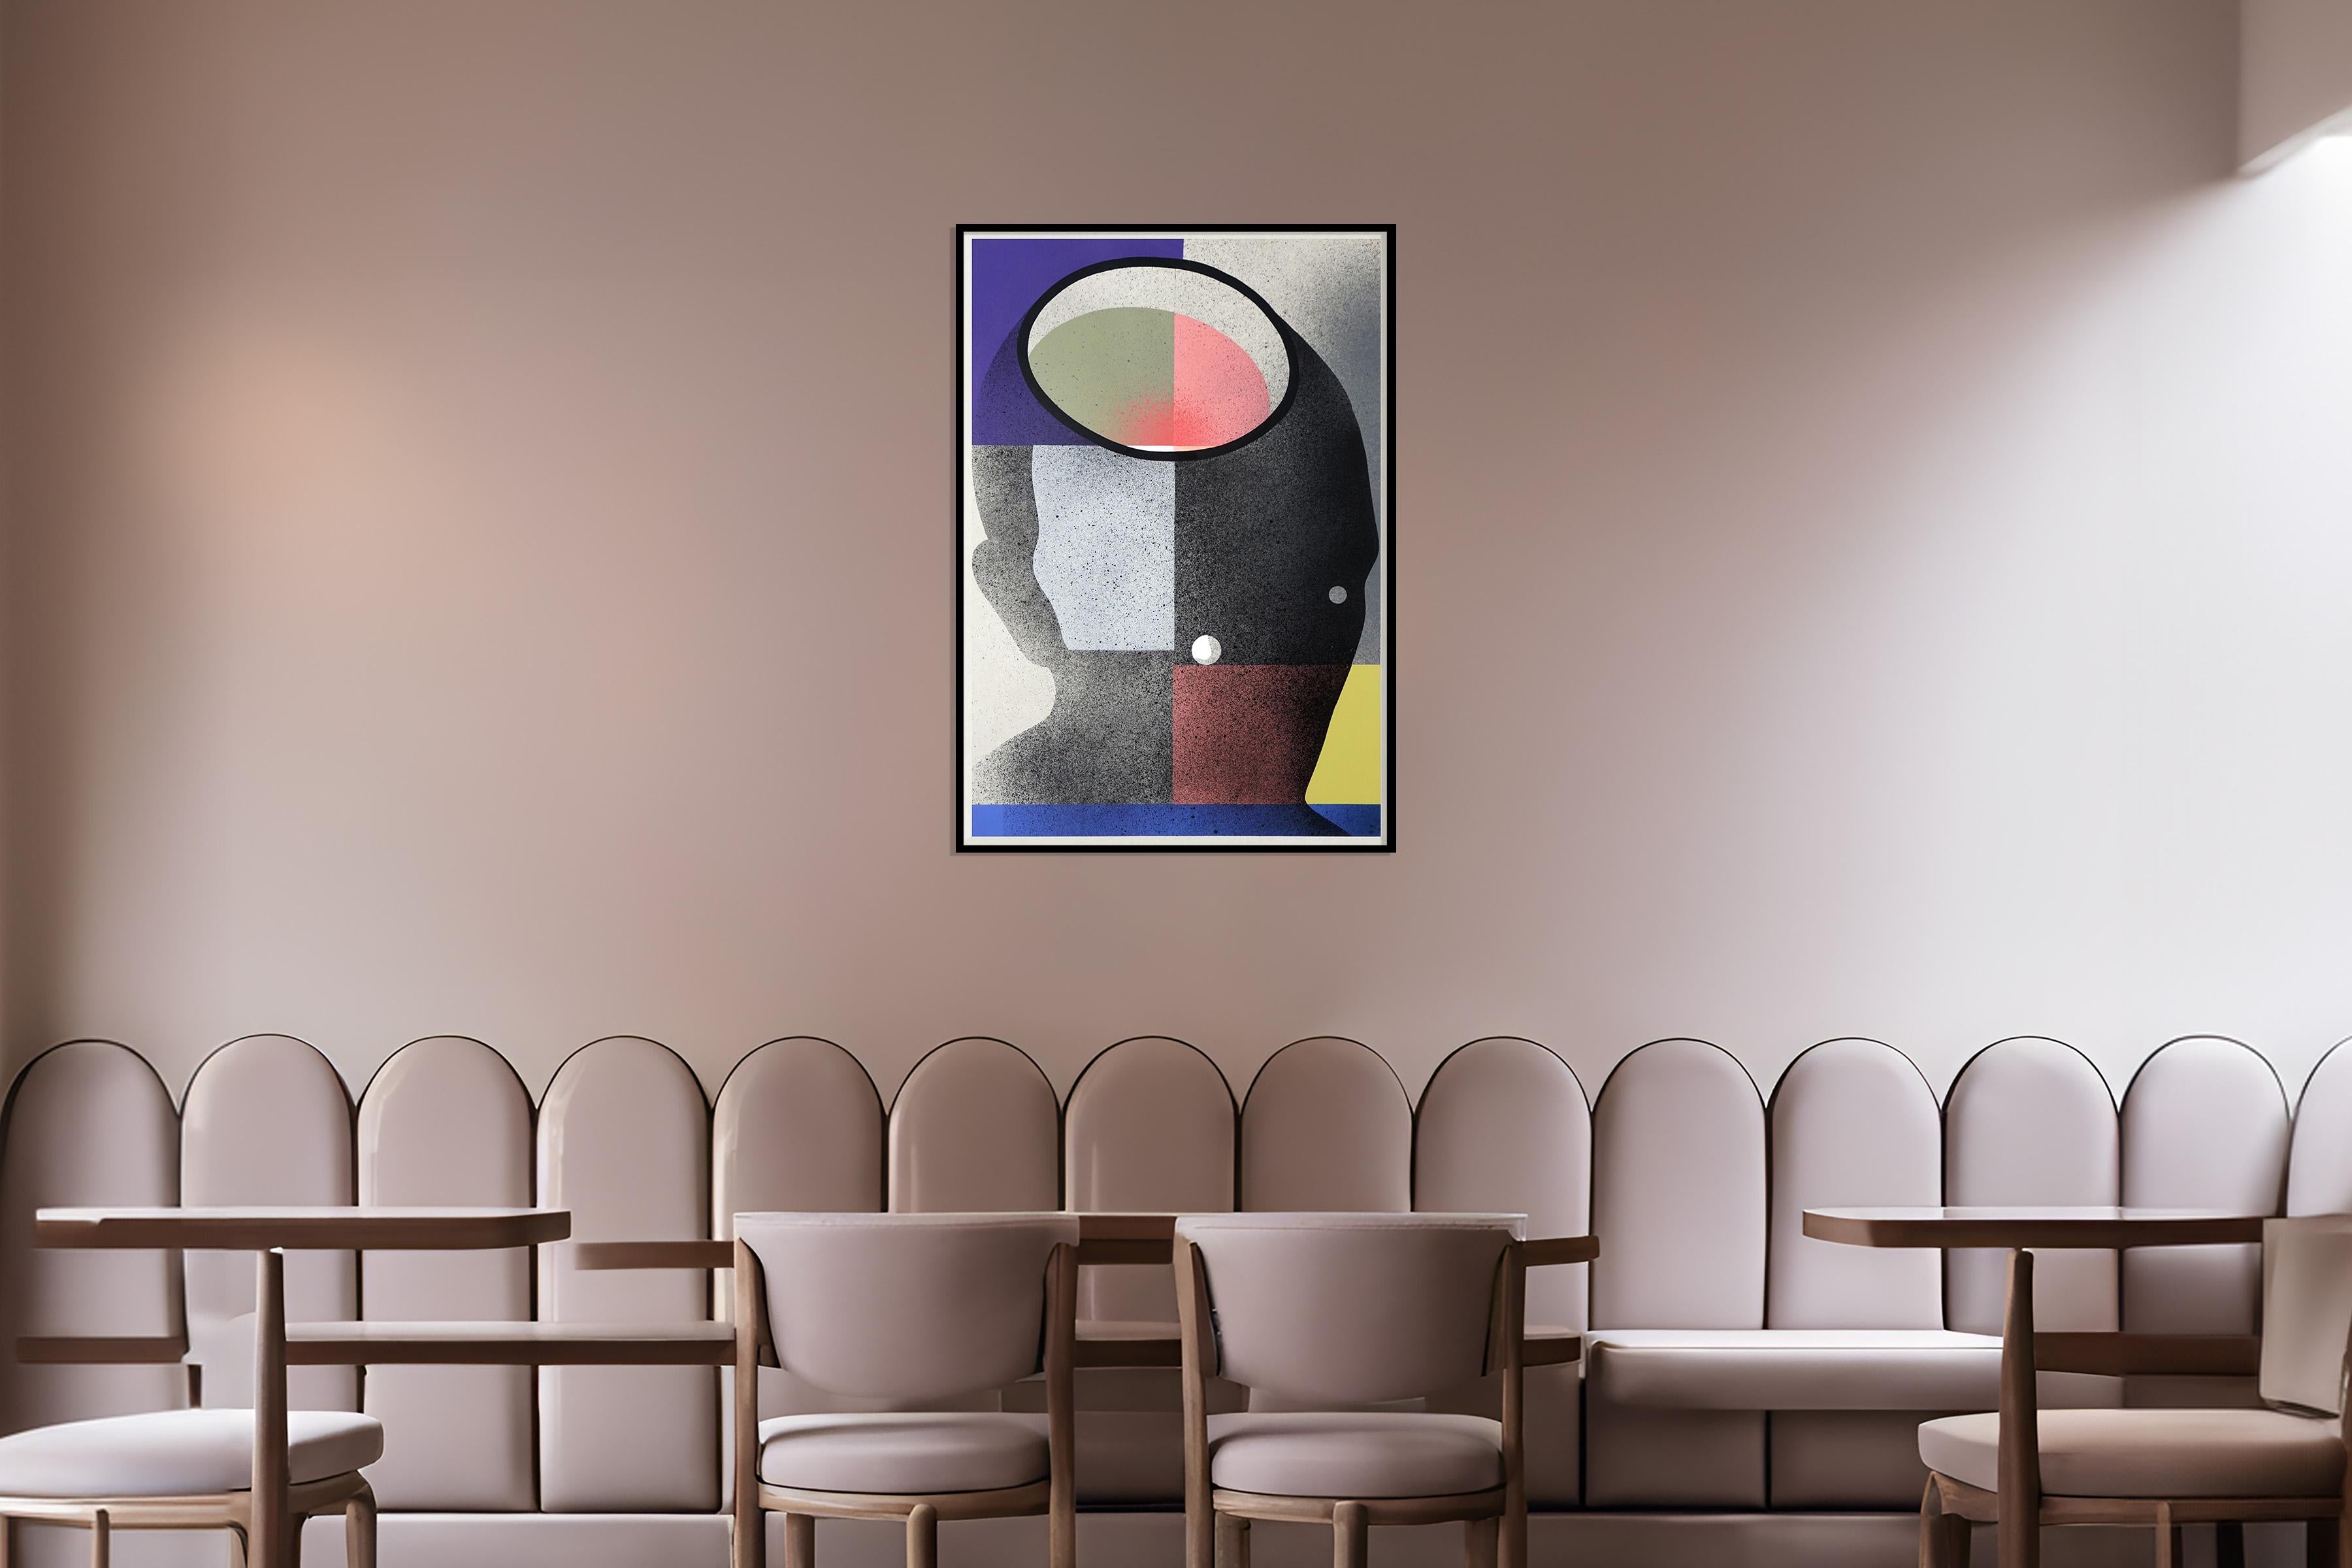 Indoors, Figurative Painting Portrait in Black, Square Shapes in Yellow & Pink For Sale 3